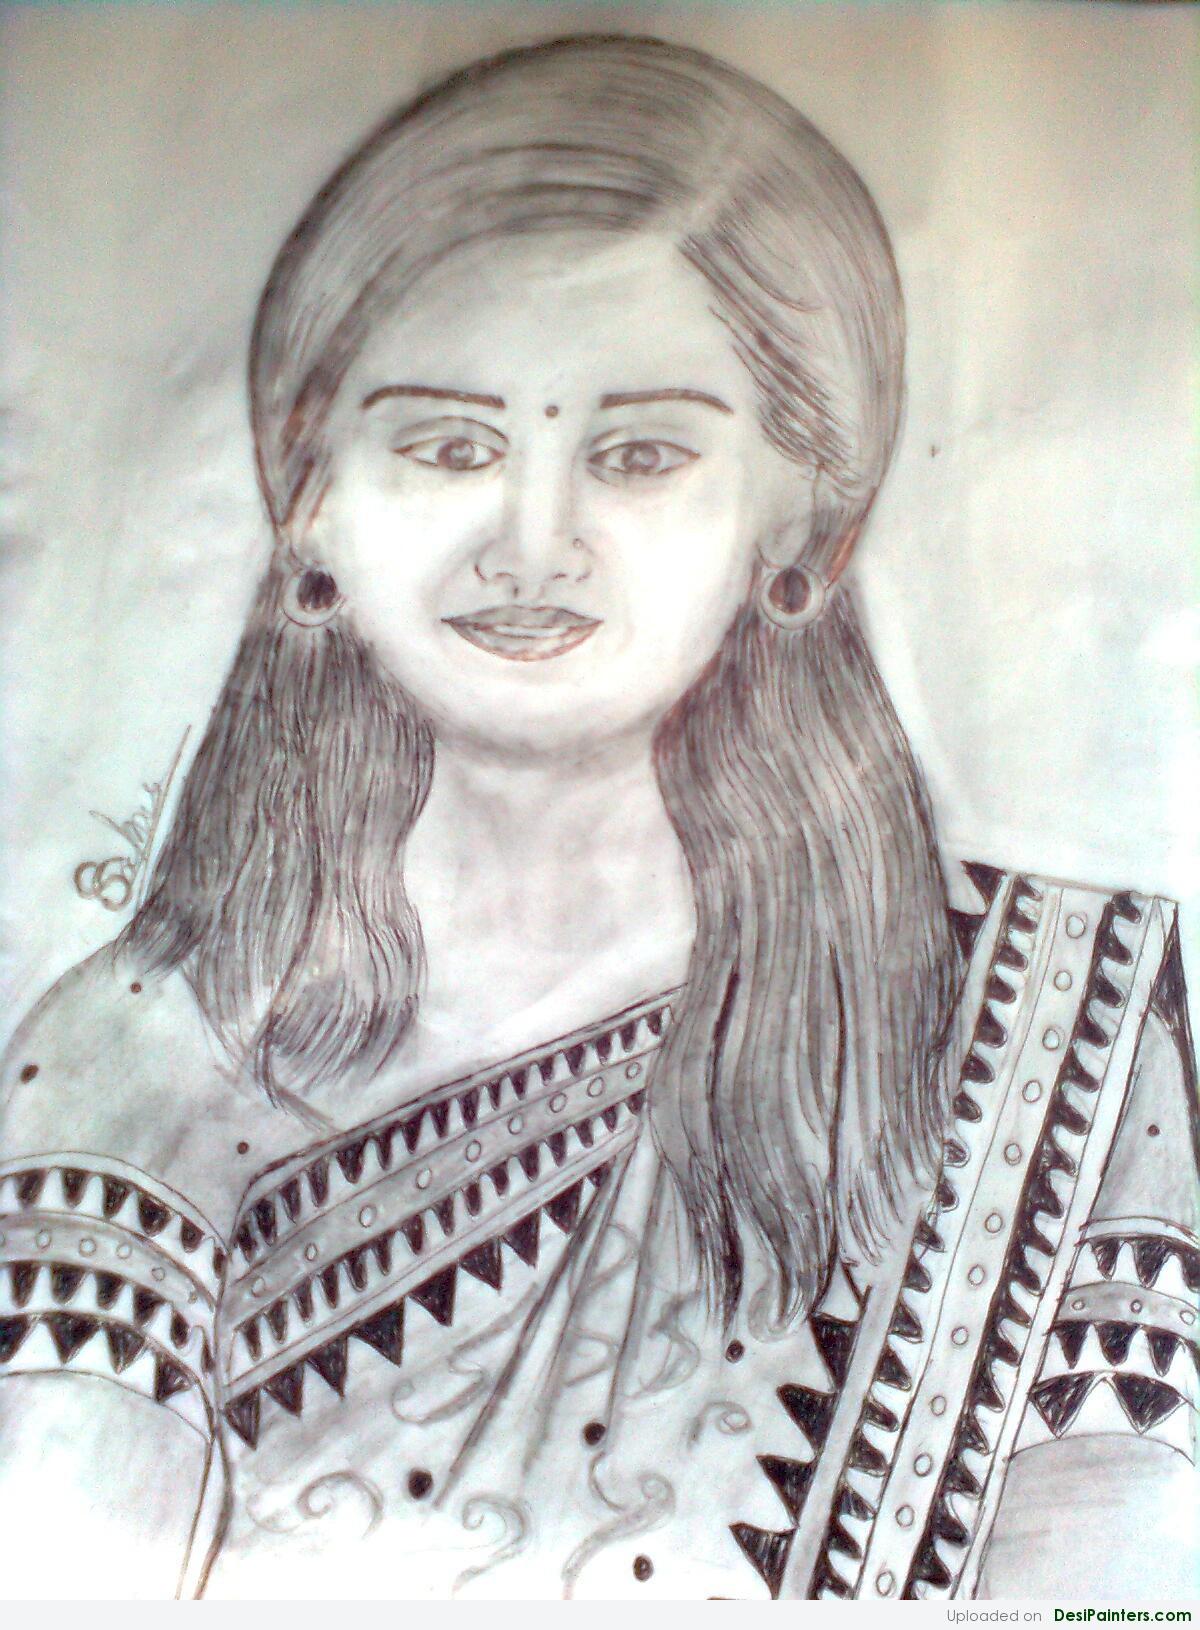  Pencil  Sketch  Of An Indian  Girl DesiPainters com